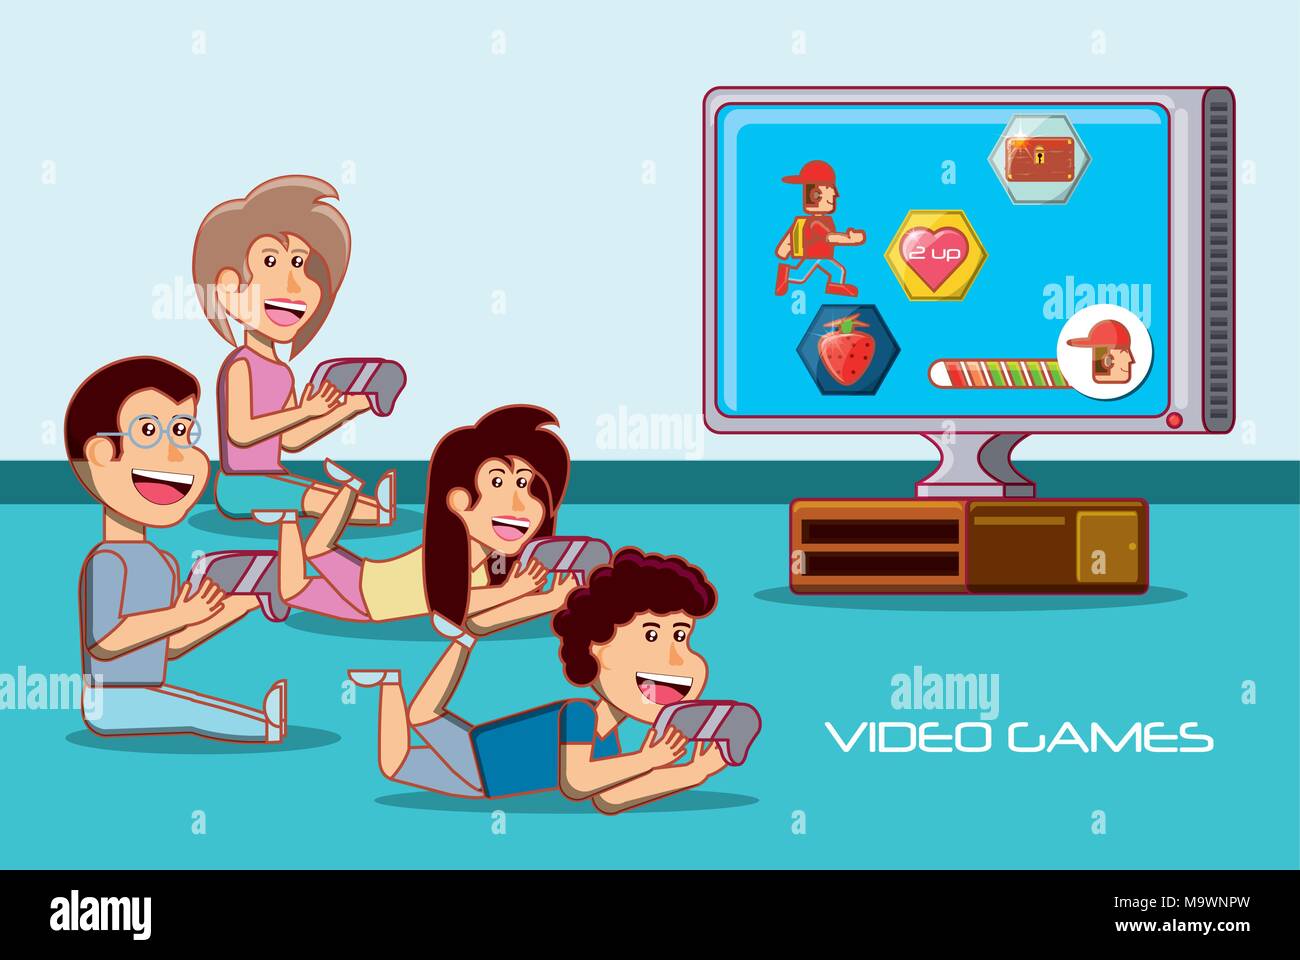 Kids Gaming Stock Vector Images - Alamy1300 x 960